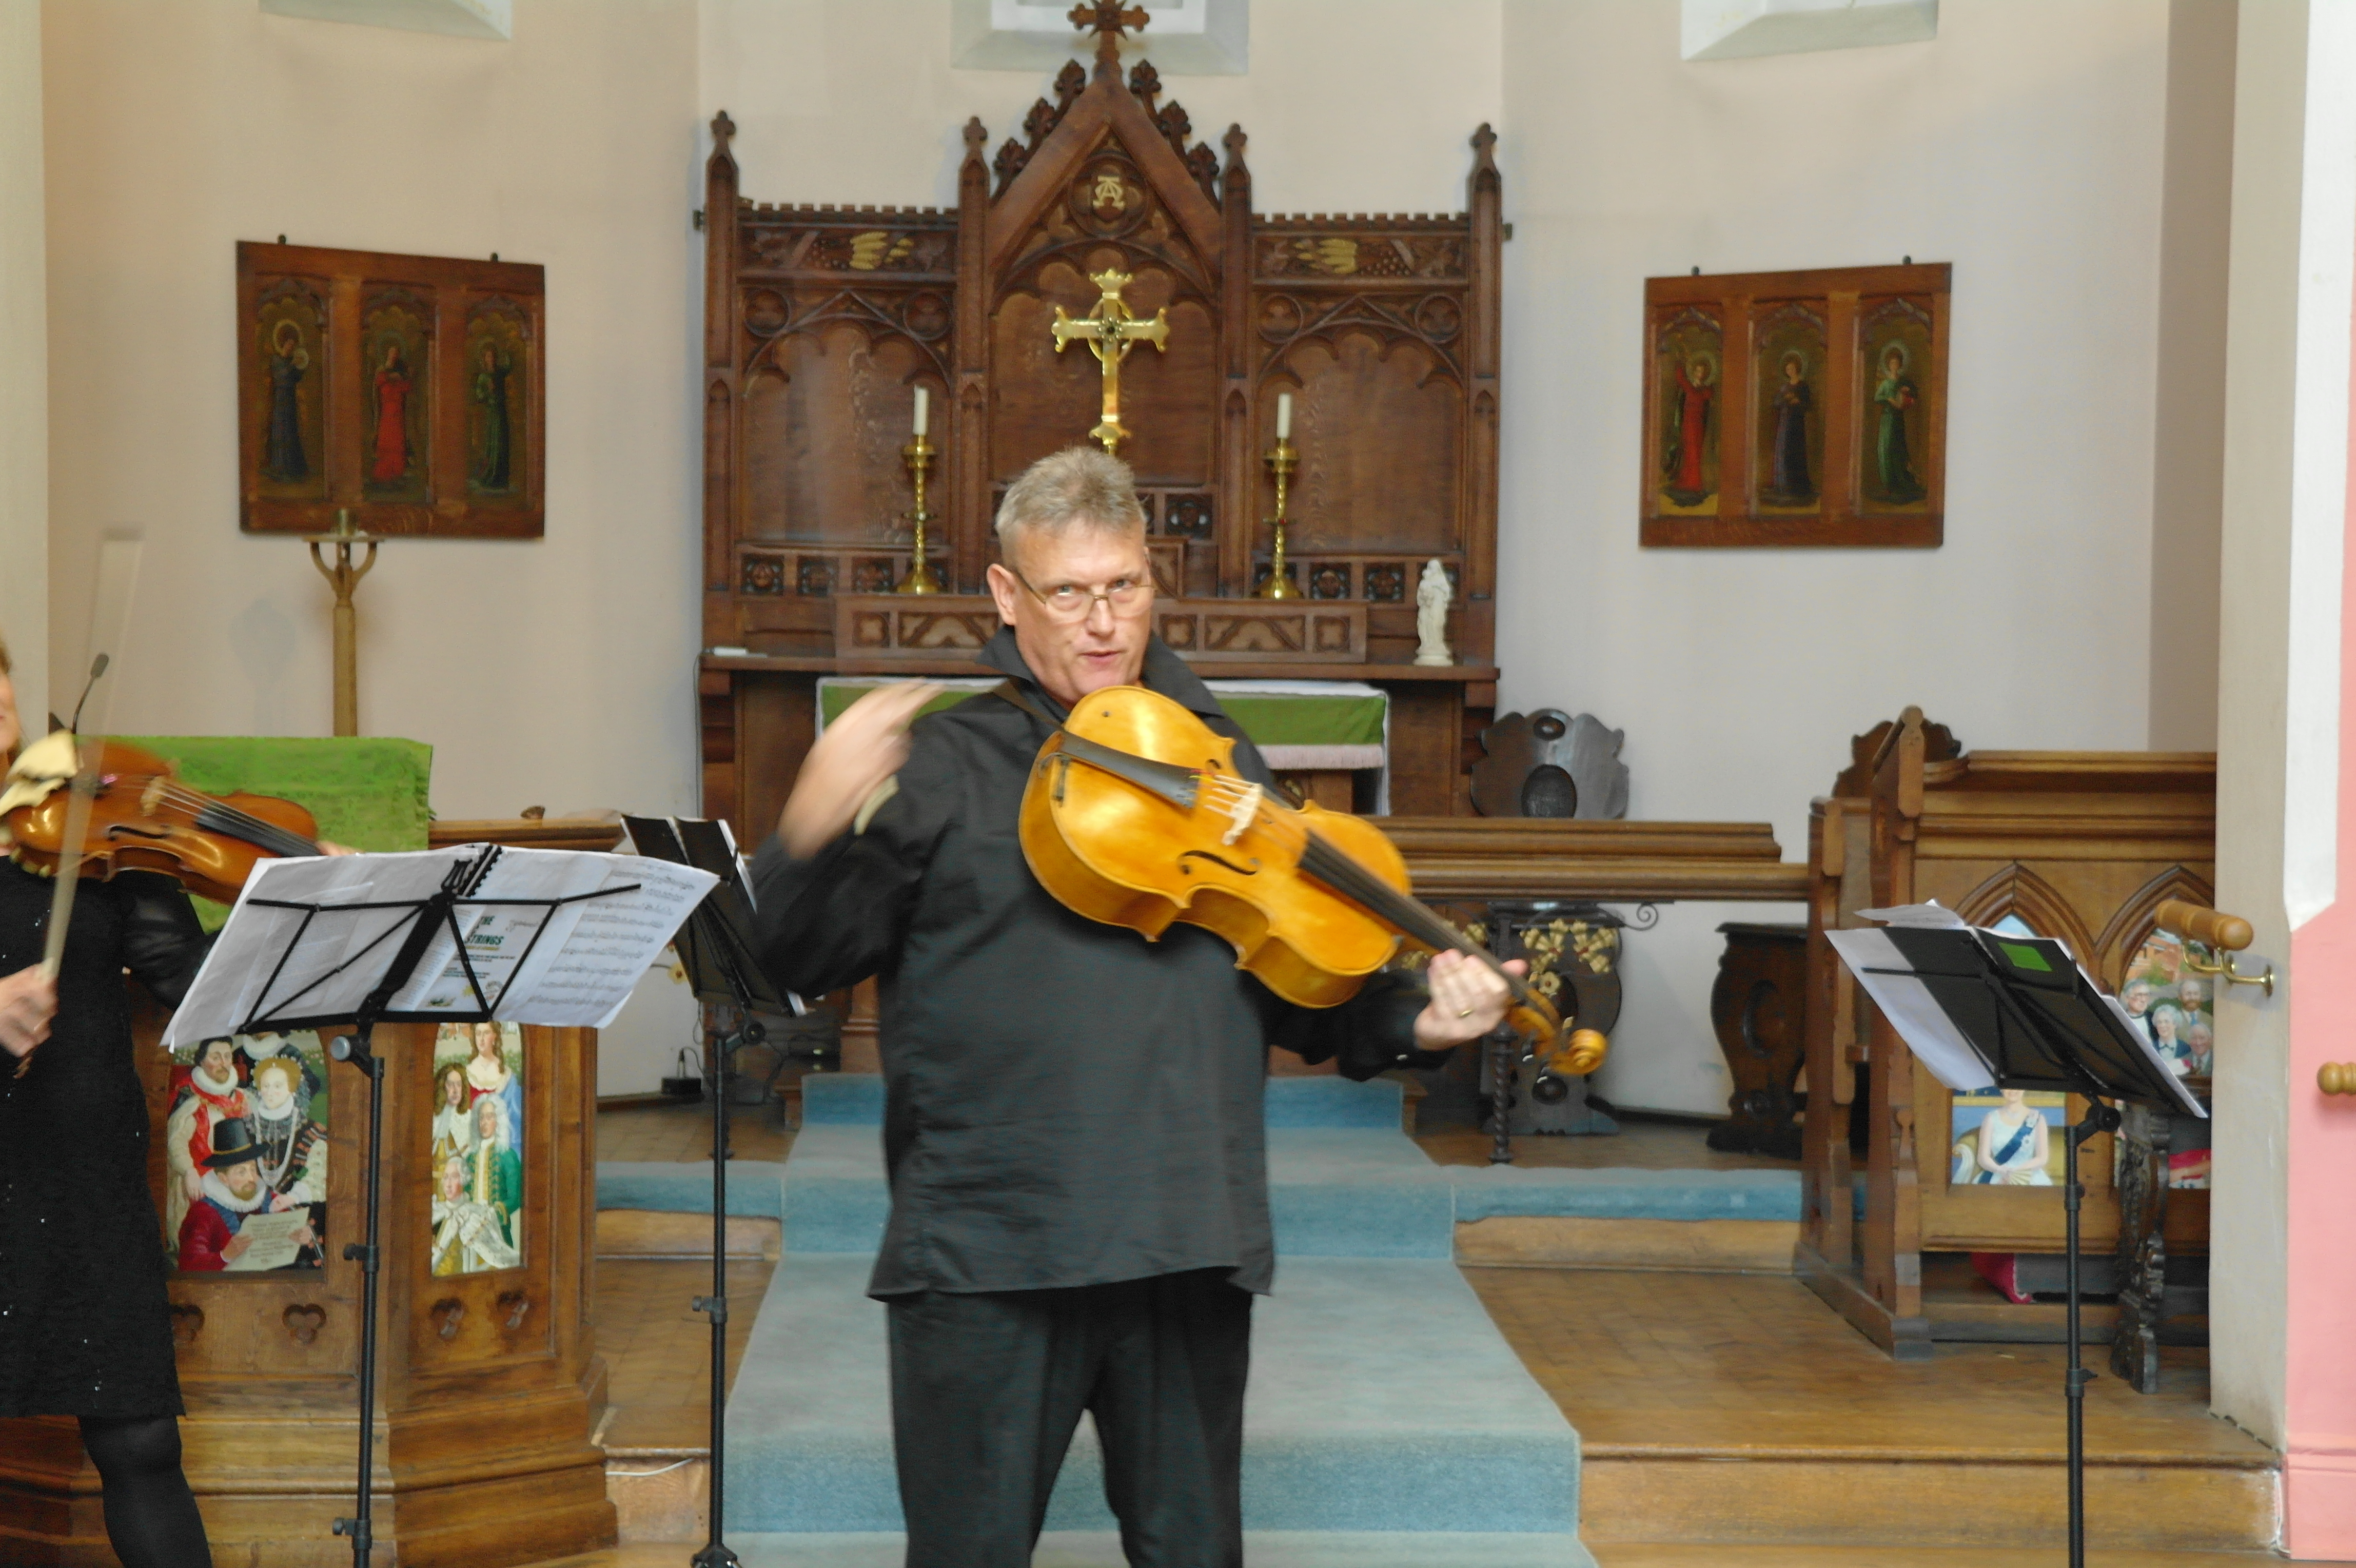 Seasonal string concert to raise essential funds for Victorian chapel in Woodbridge